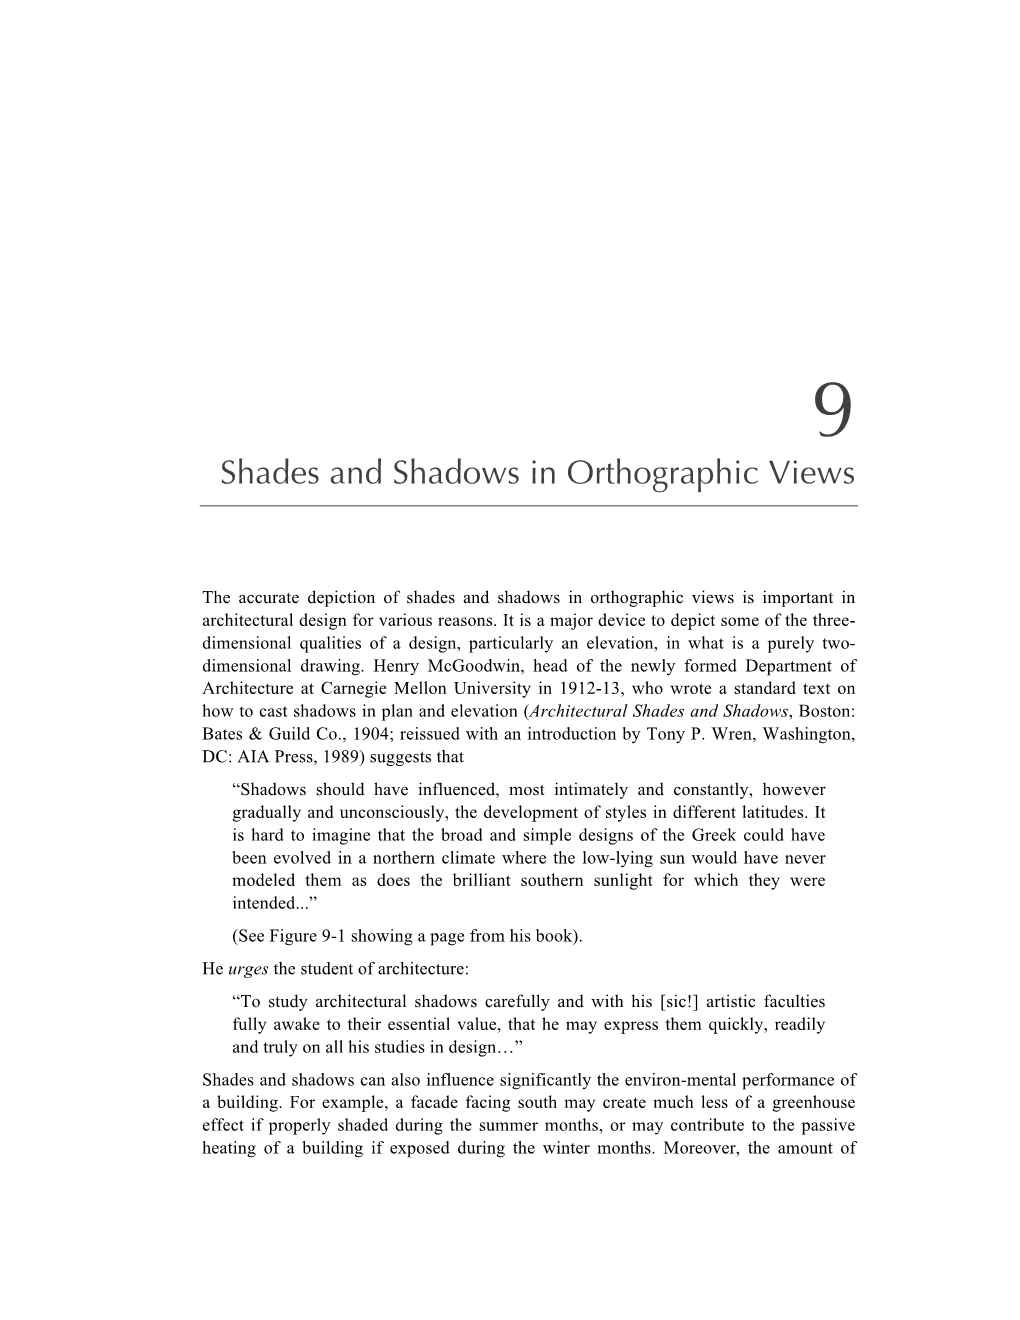 Shades and Shadows in Orthographic Views